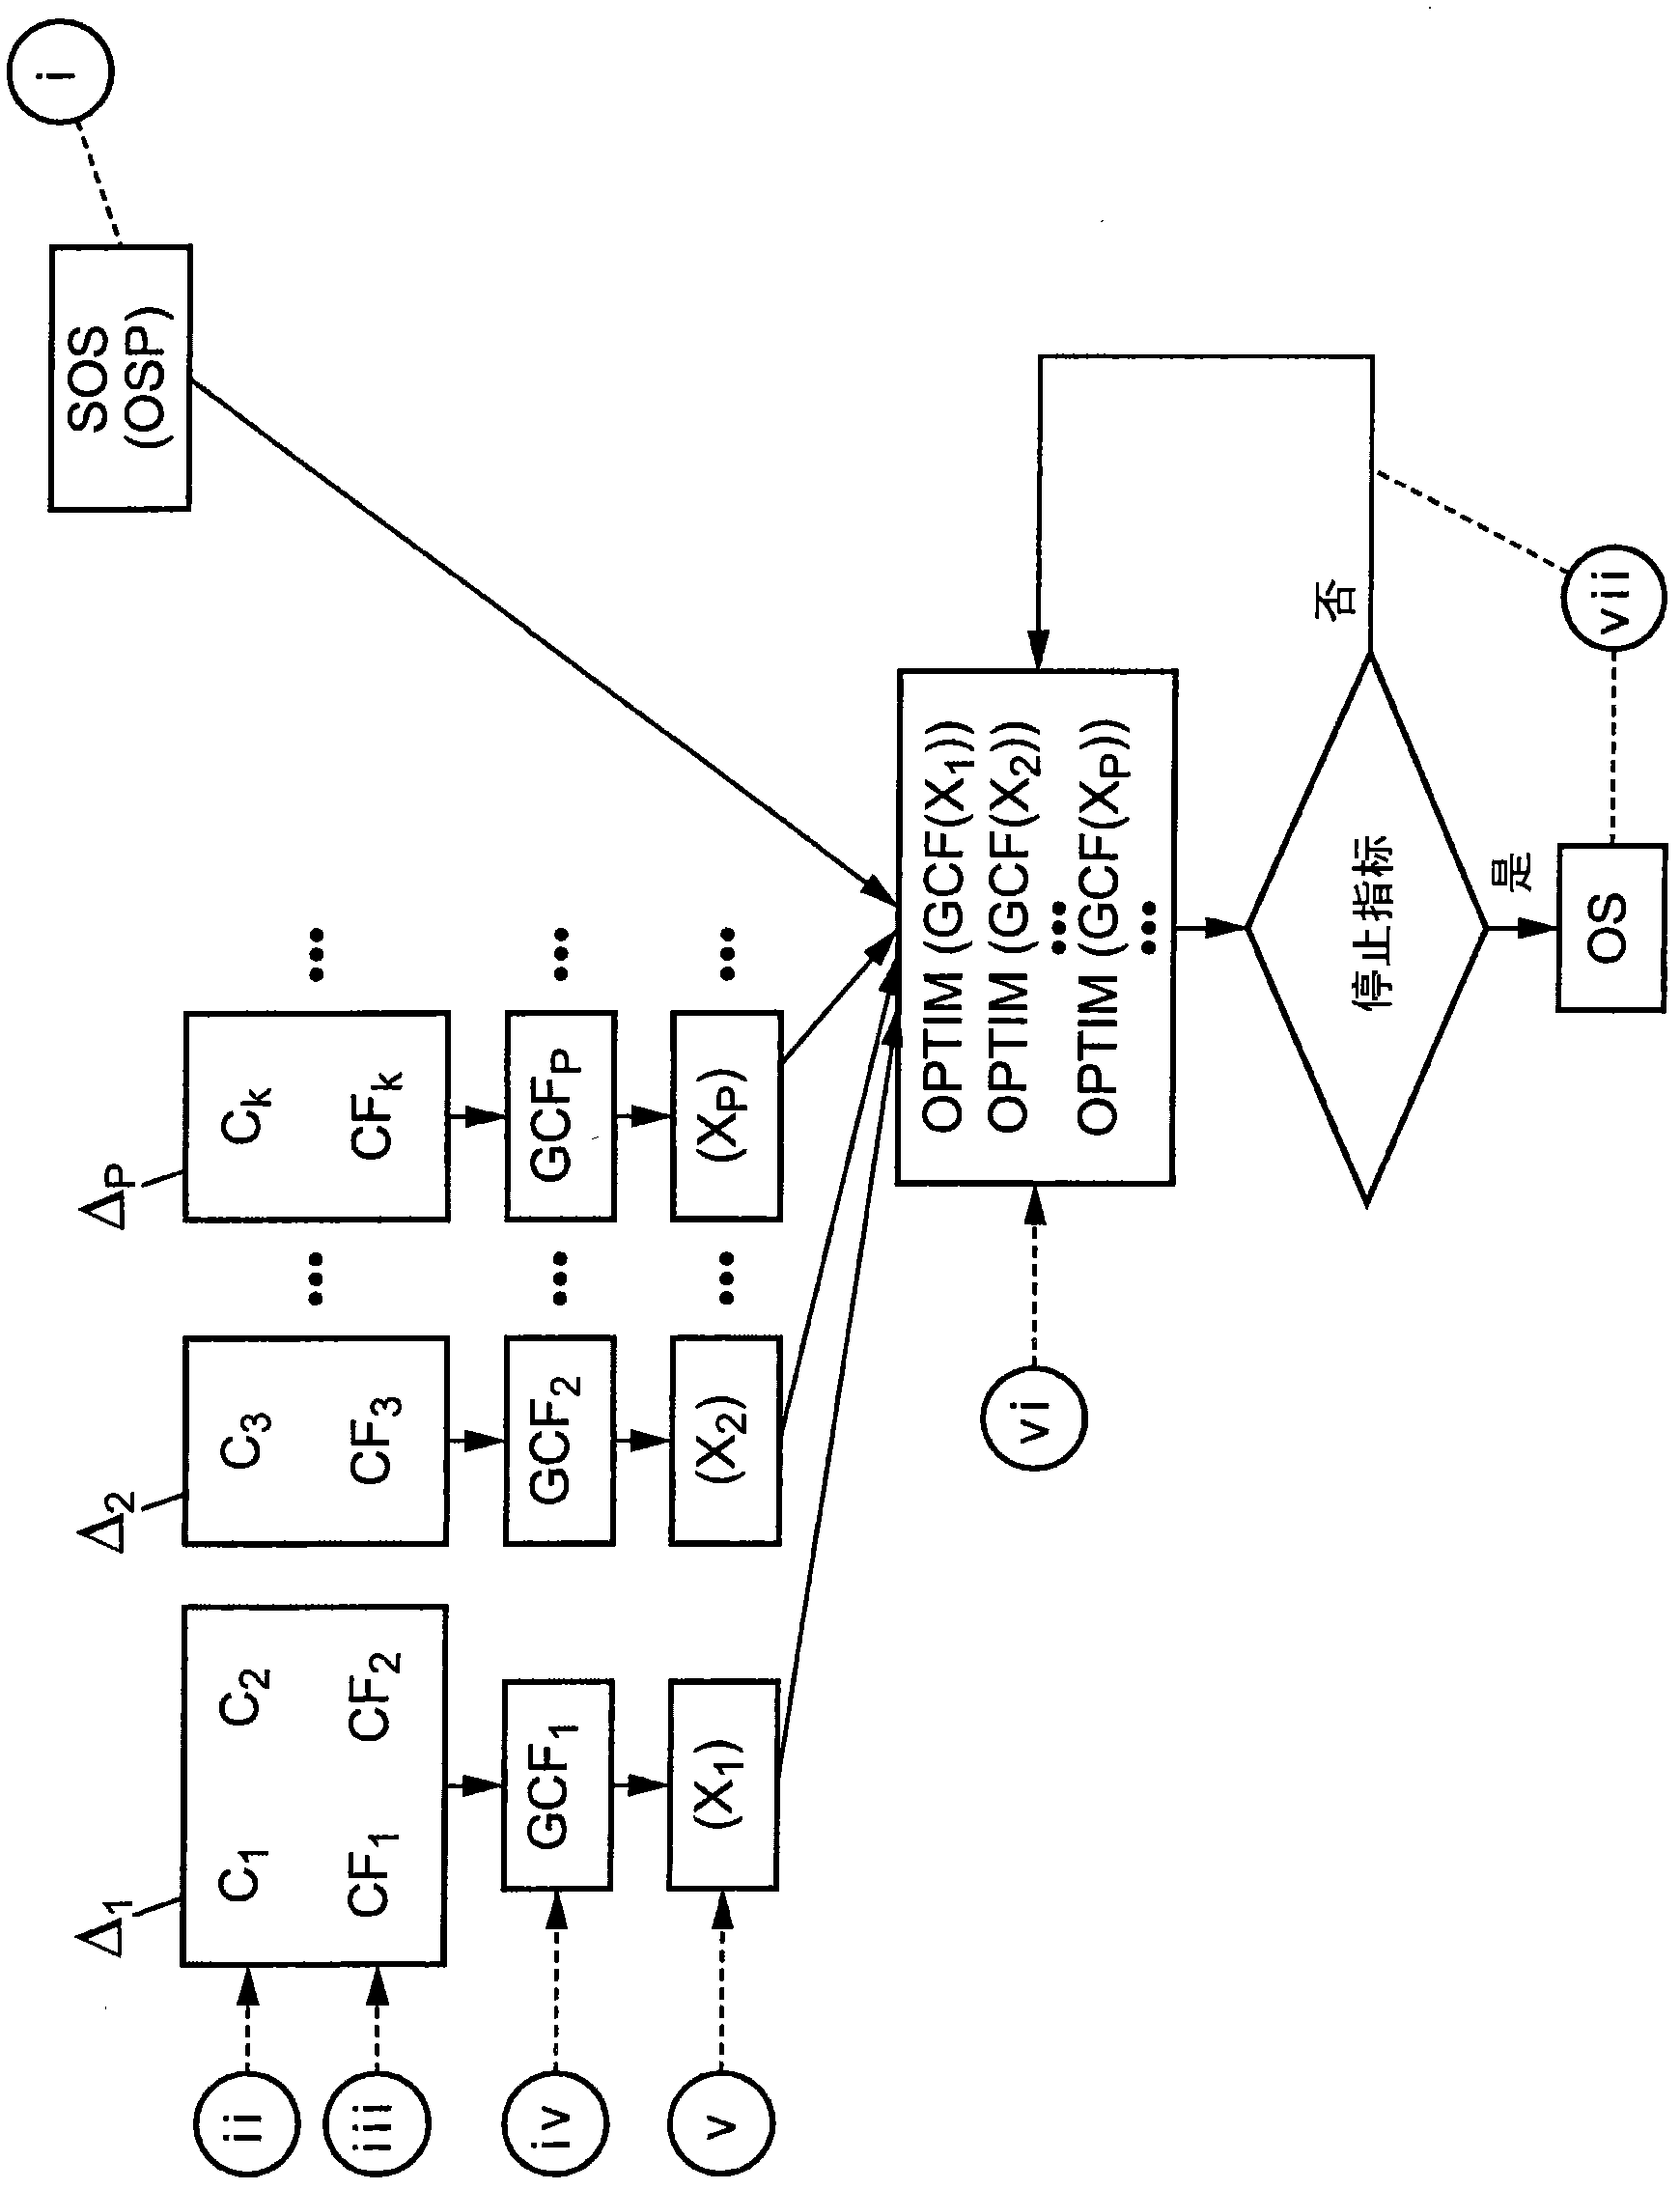 Method for calculating a system, for example an optical system